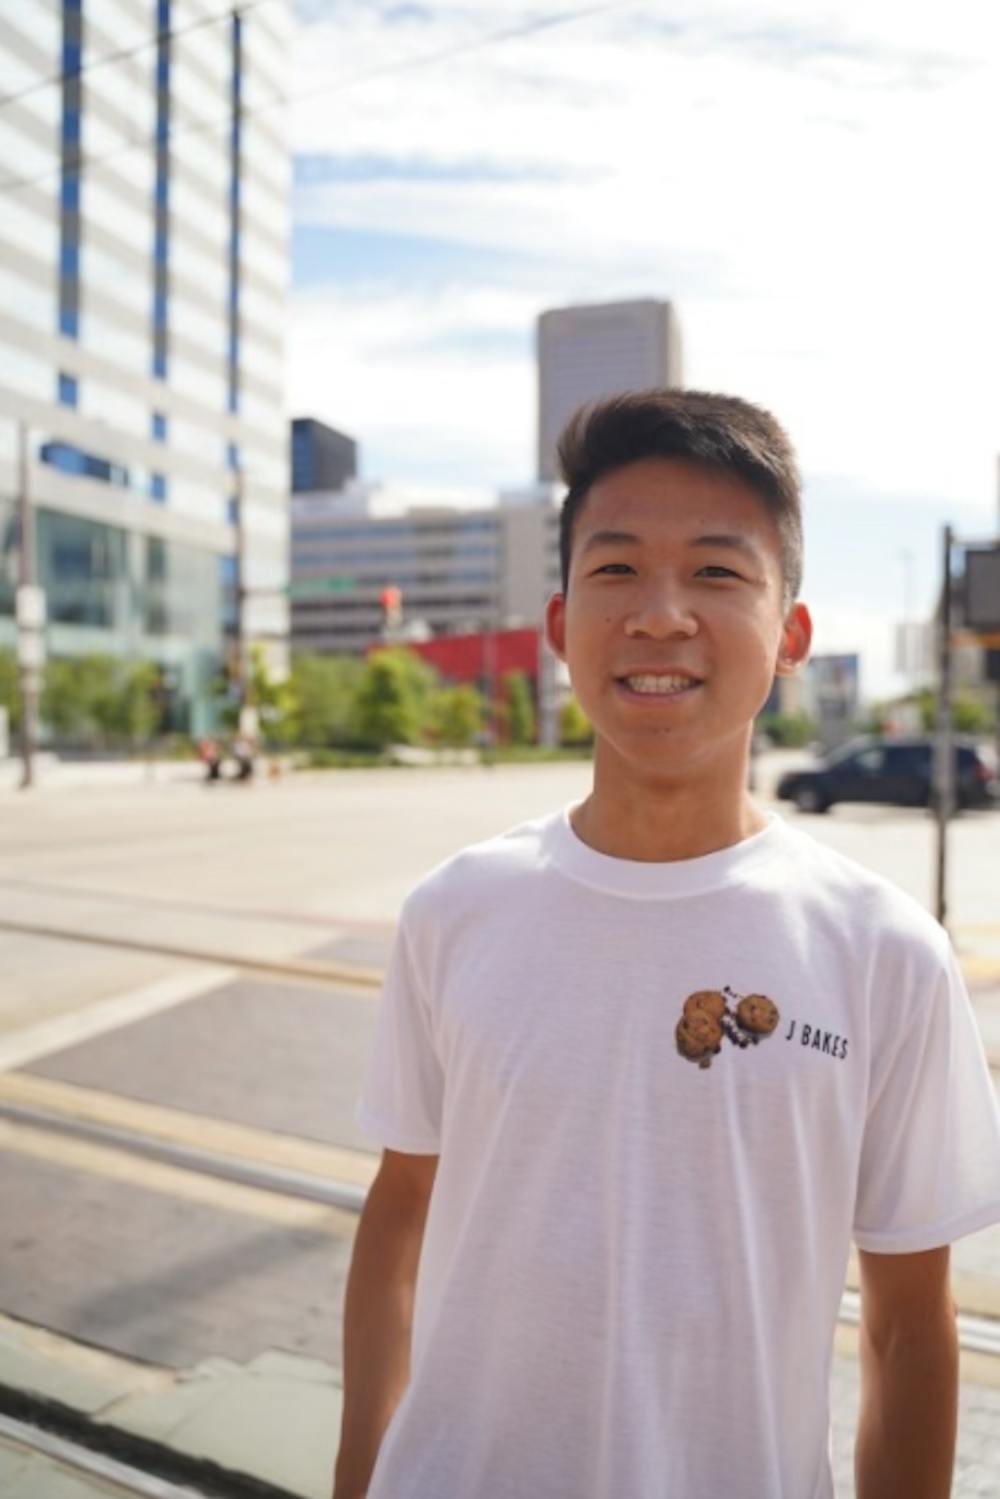 Yuen smiling for a photo in his J Bakes merch (Photo courtesy of Justin Yuen).